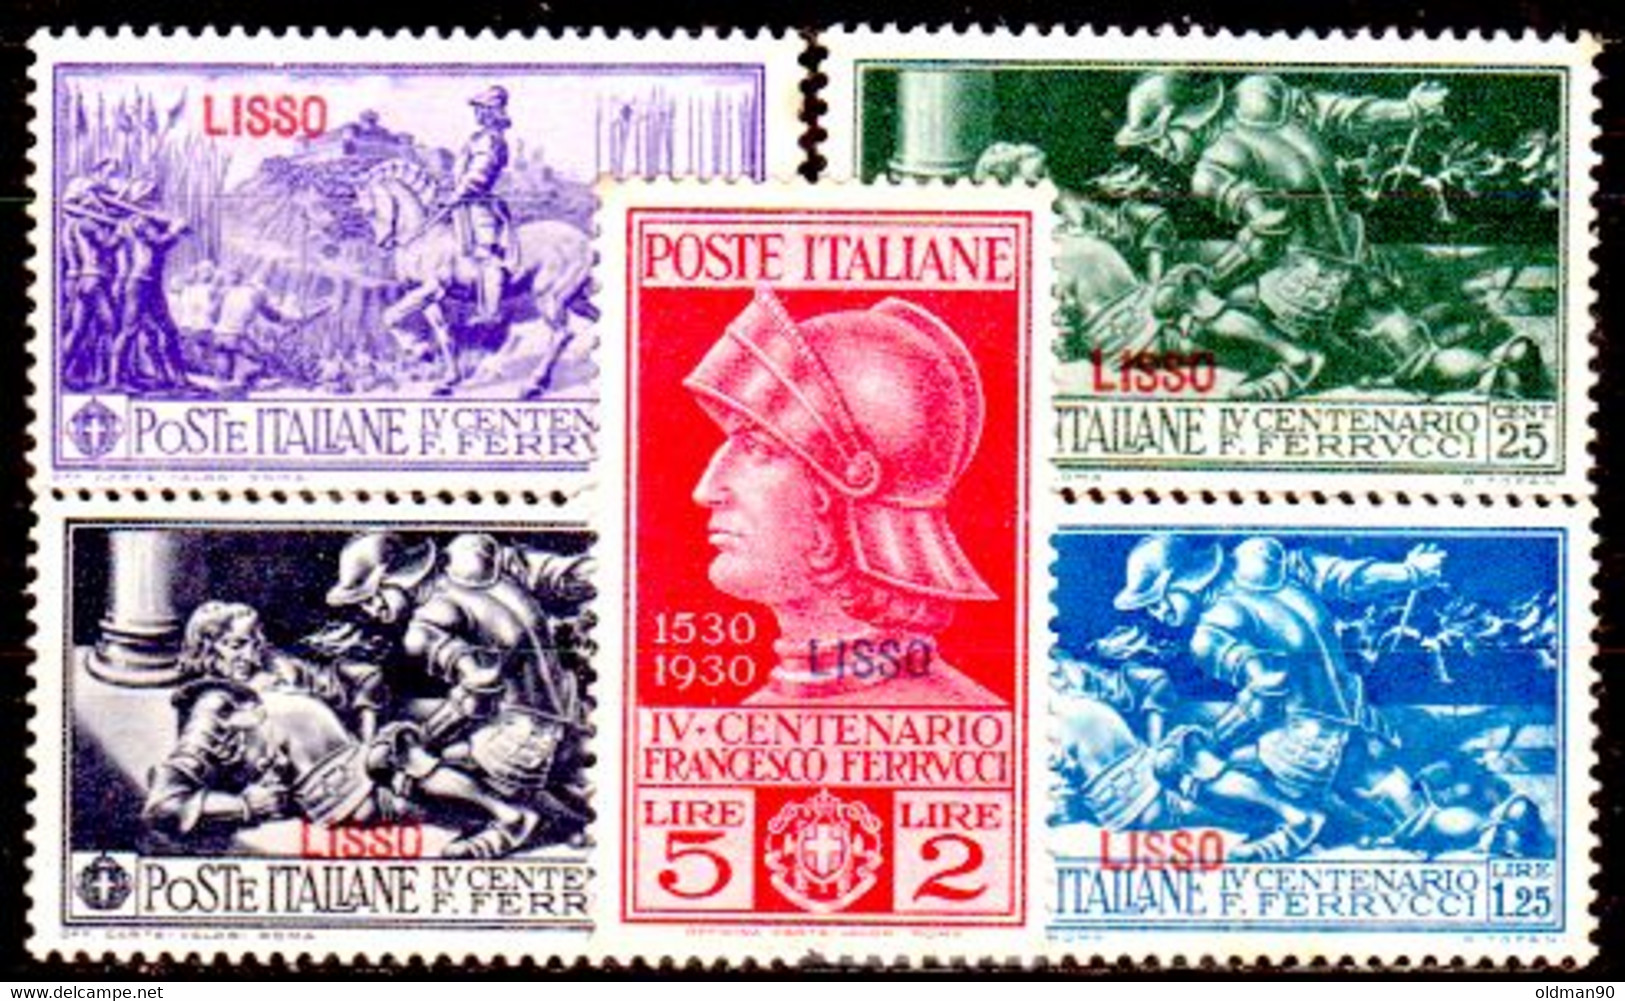 Egeo-OS-300- Lipso: Original Stamps And Overprint 1930 (++) MNH - Quality In Your Opinion. - Ägäis (Lipso)